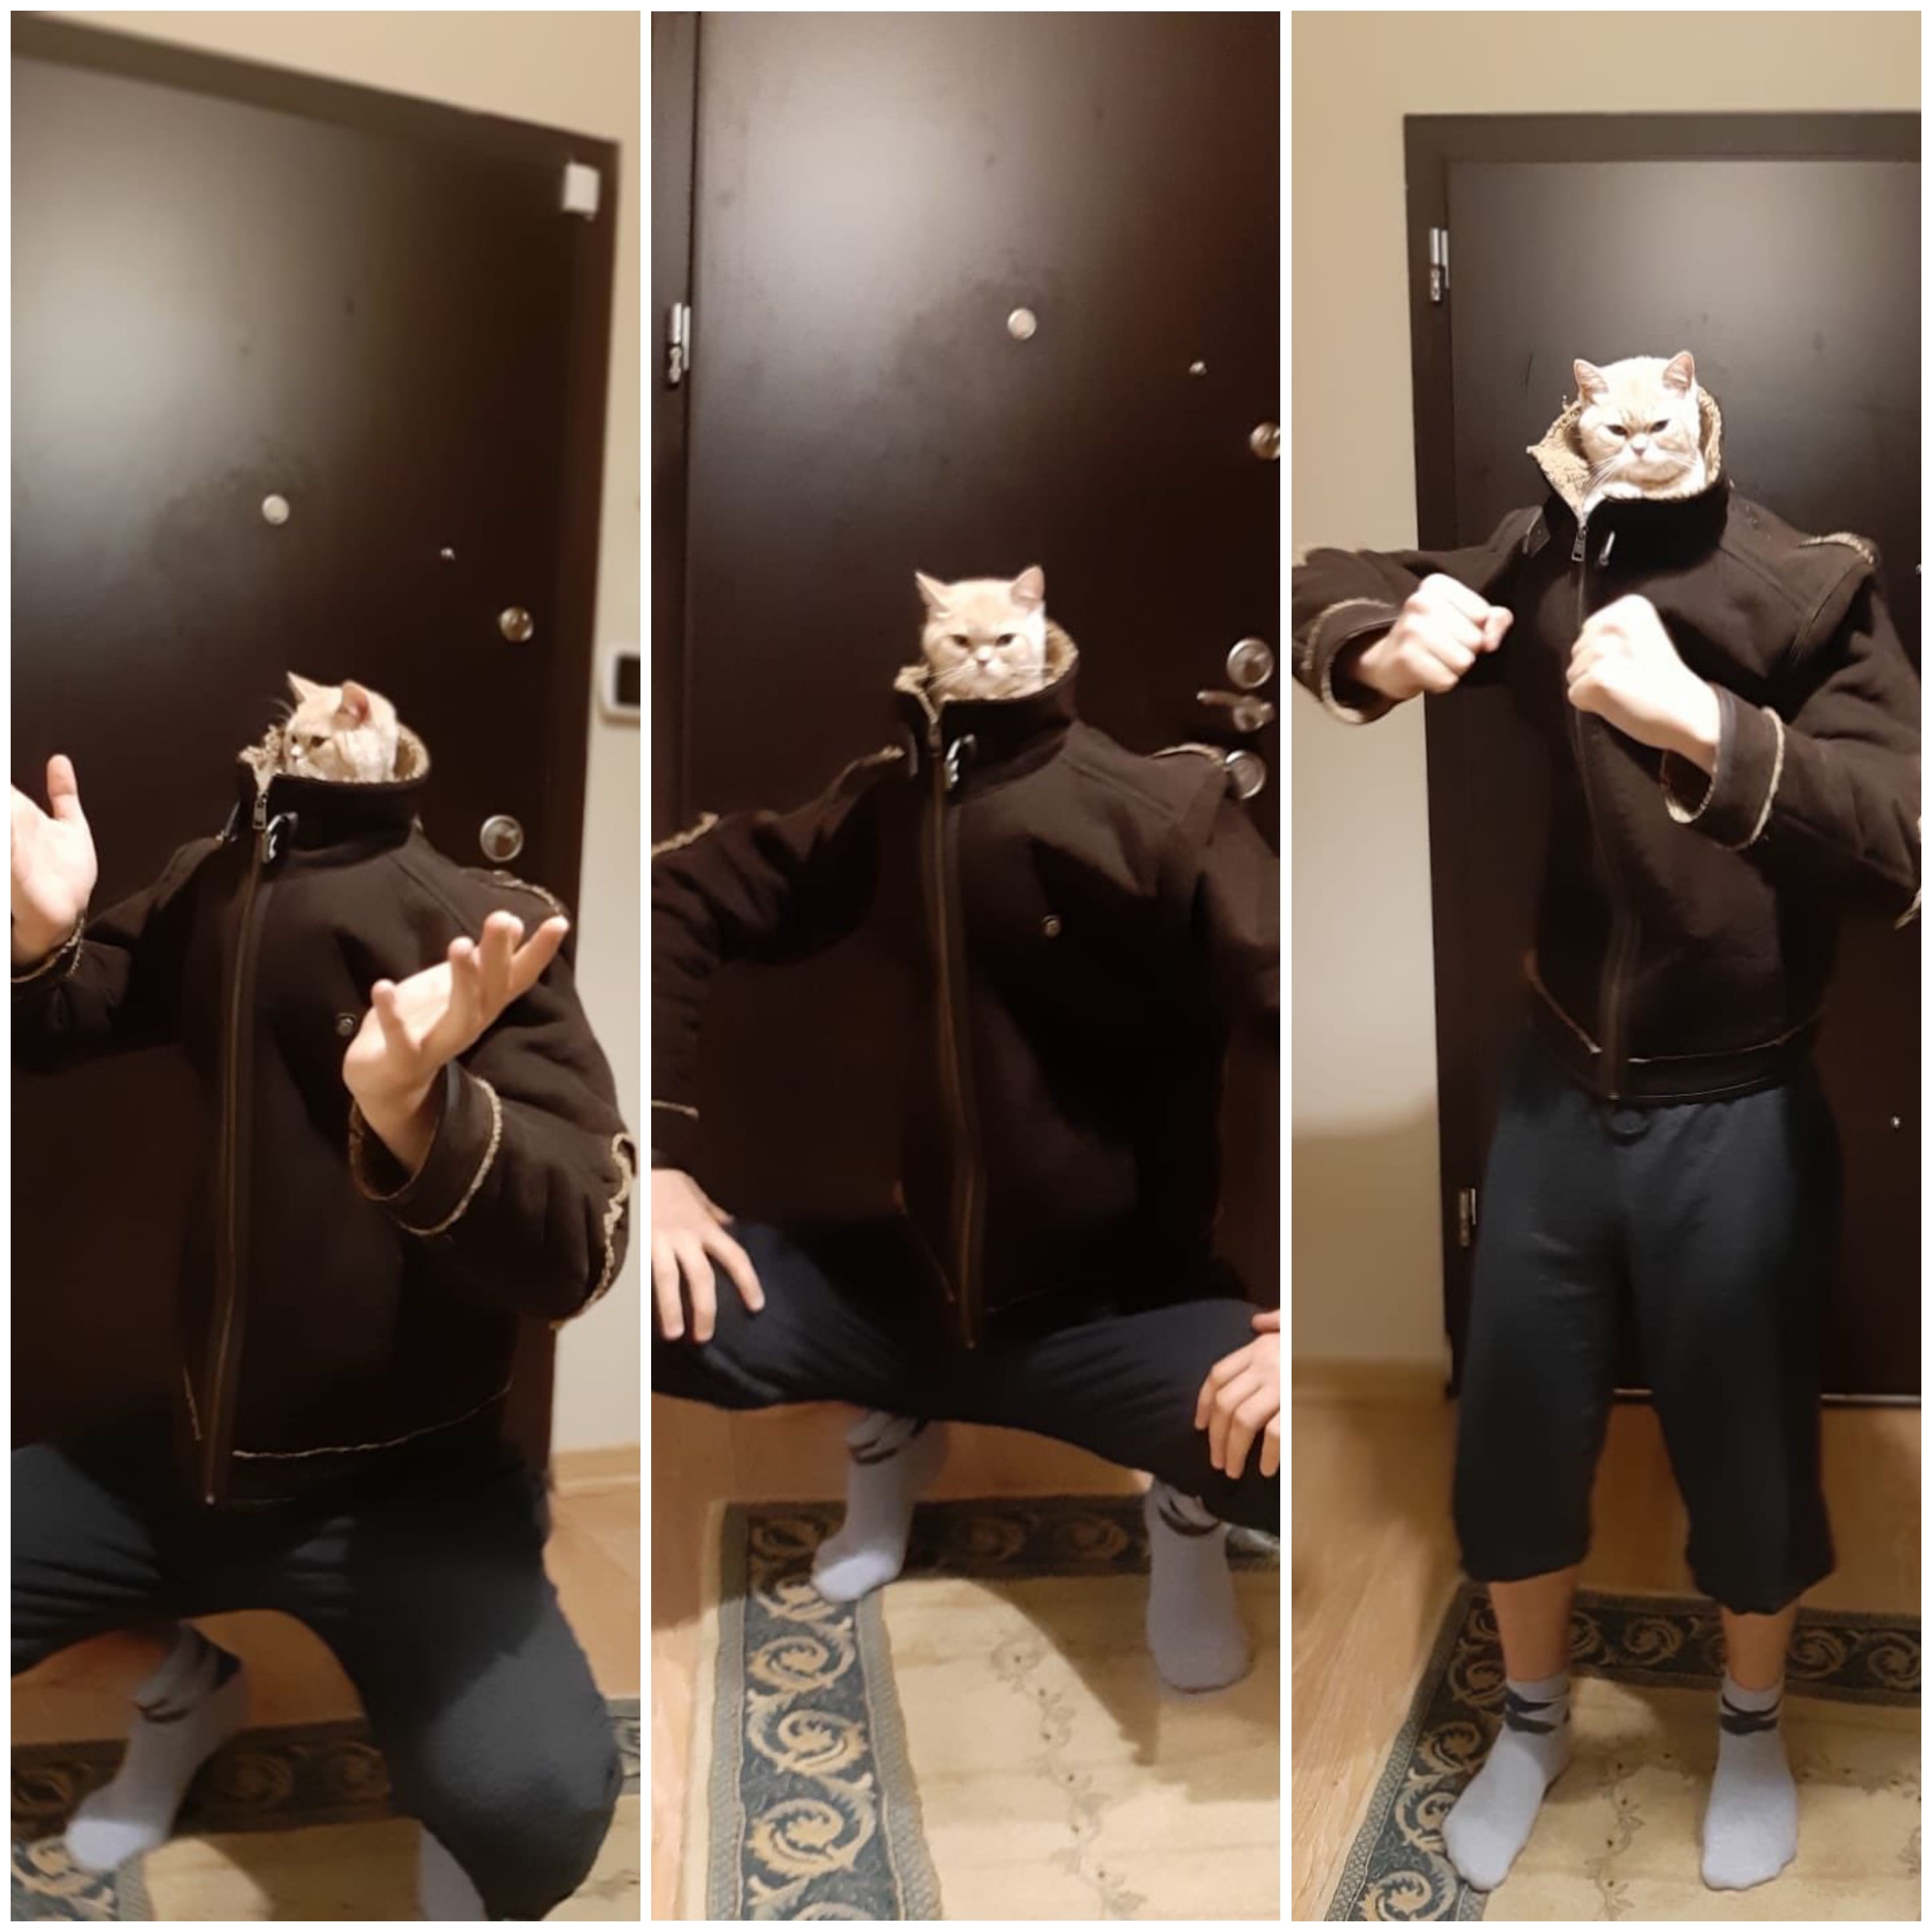 Slav Cat In Tracksuit - The Forbidden Blyat - Track, Suit, Squatting - Human Fight Chat Homme Bagarre.jpg